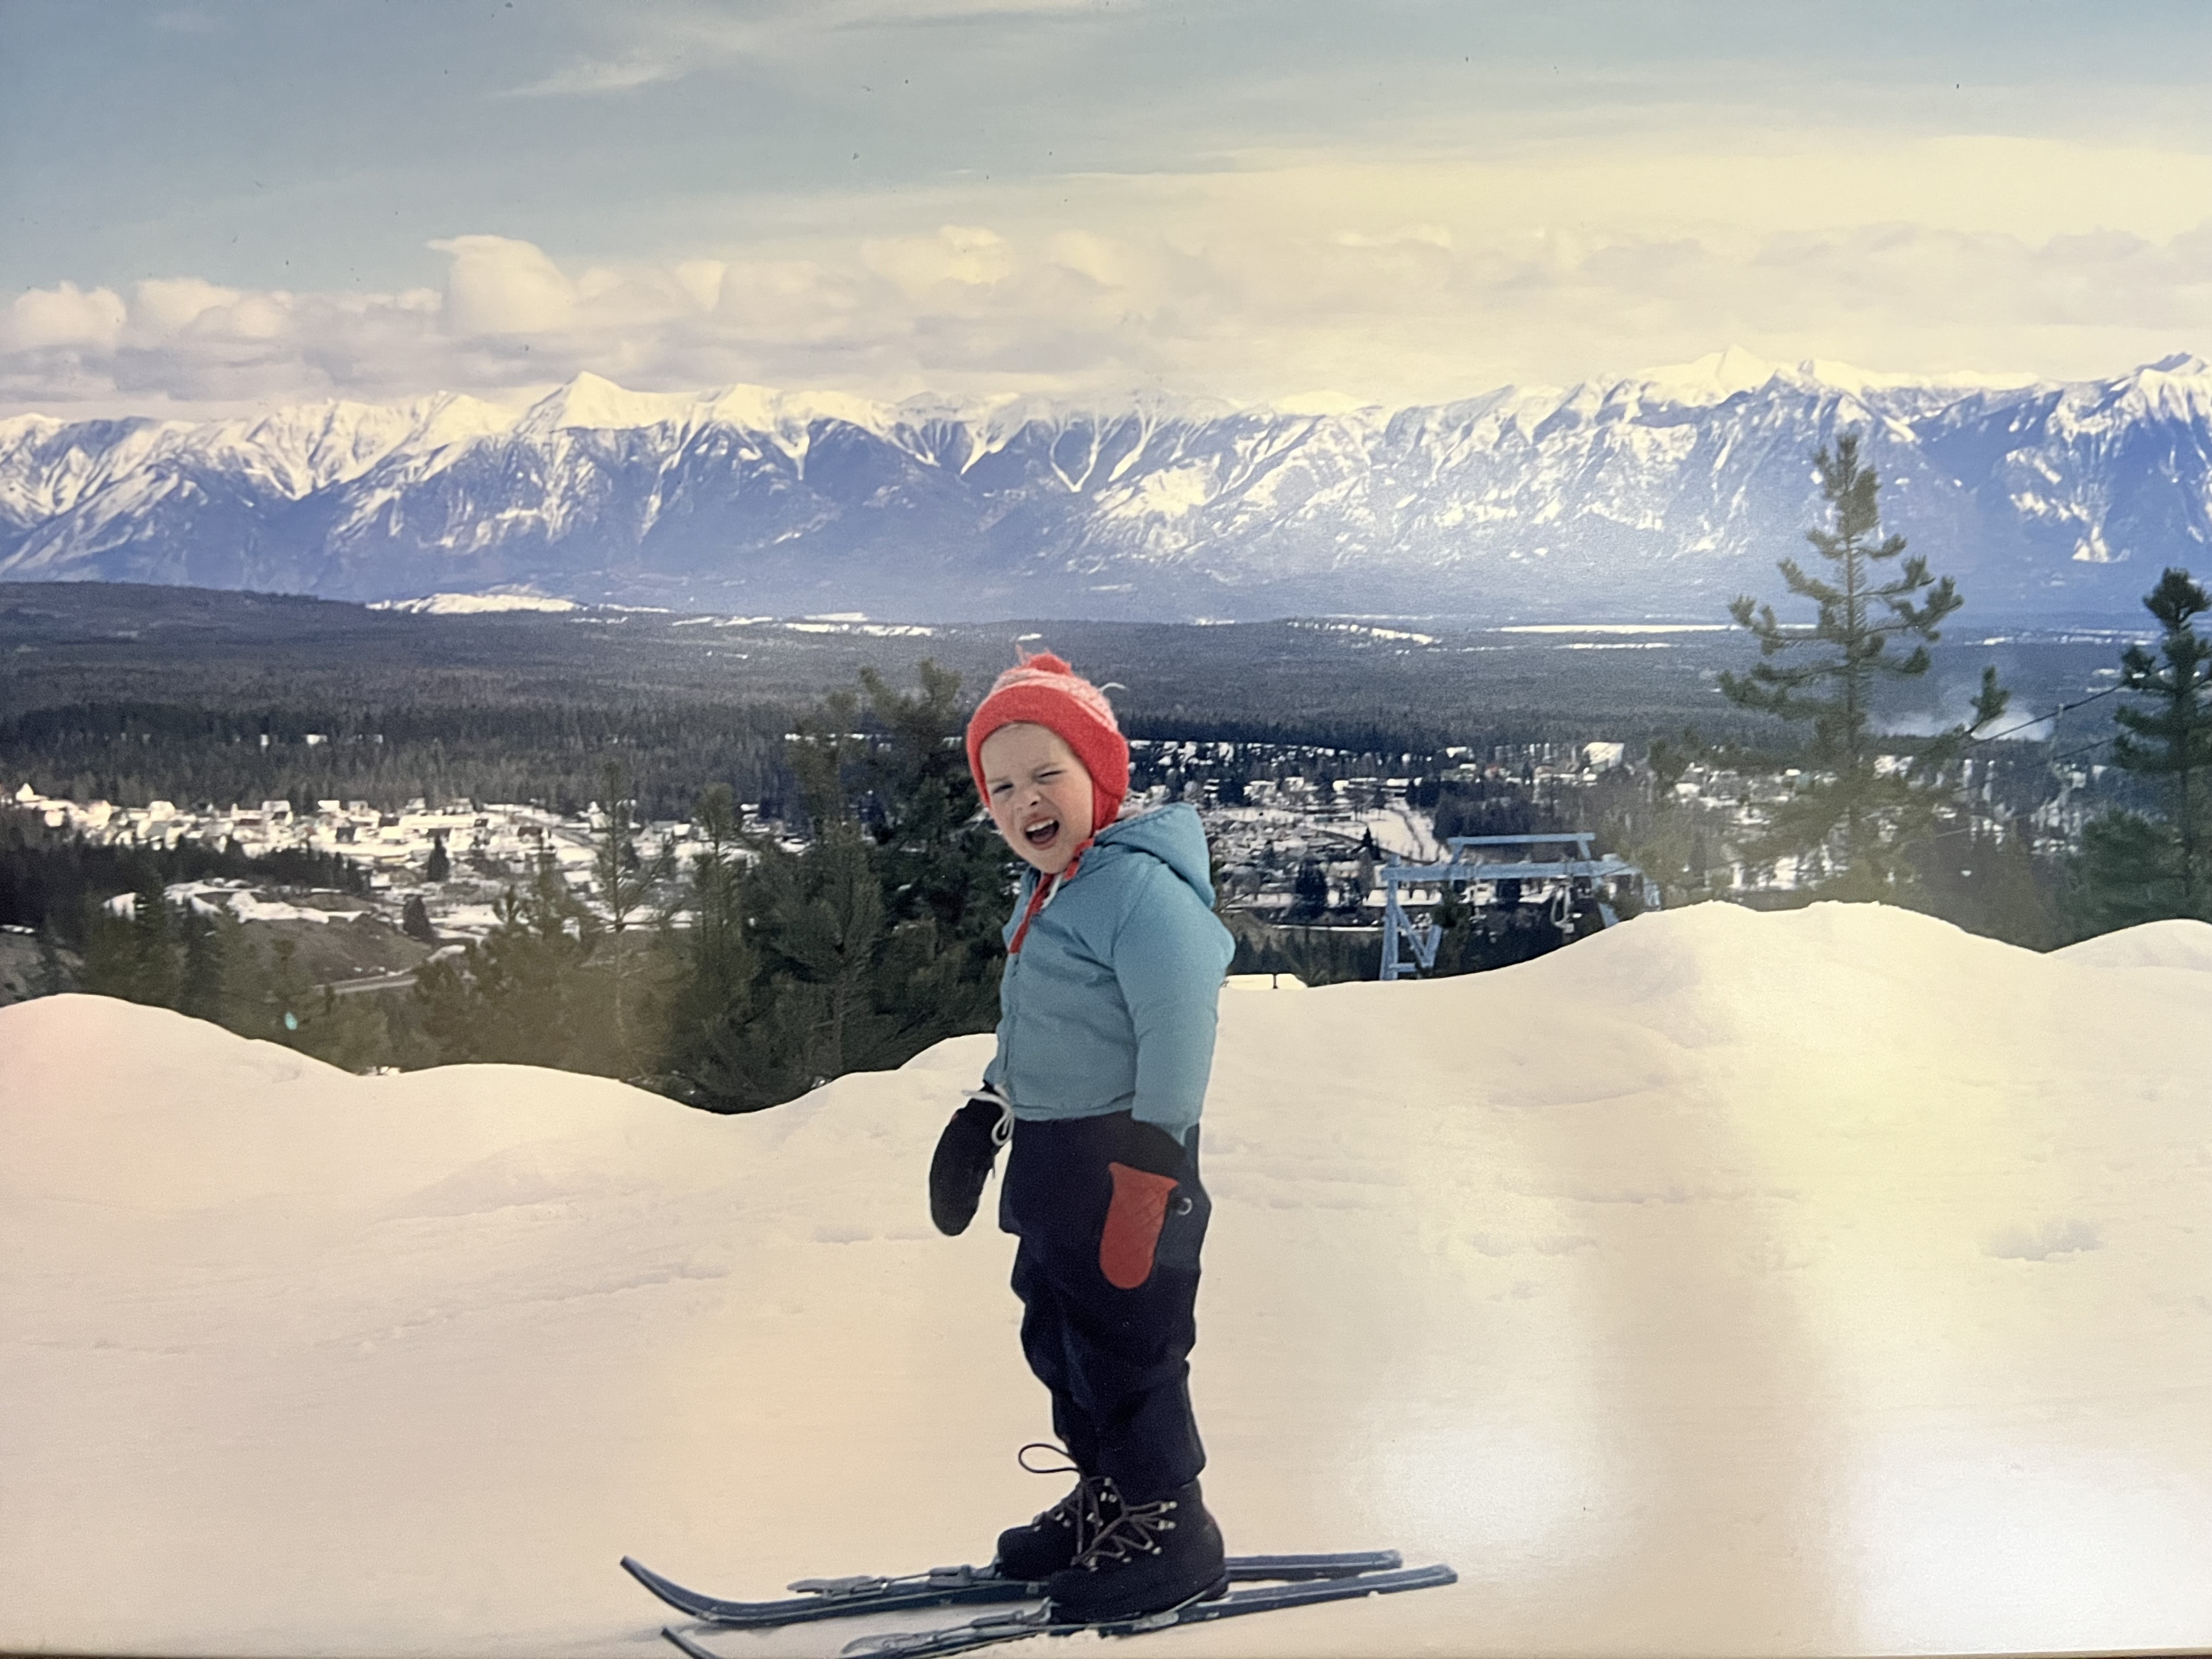 A young child in a red toque and mittens, and blue ski jacket, stands on skis on a hill with a mountain range in the background